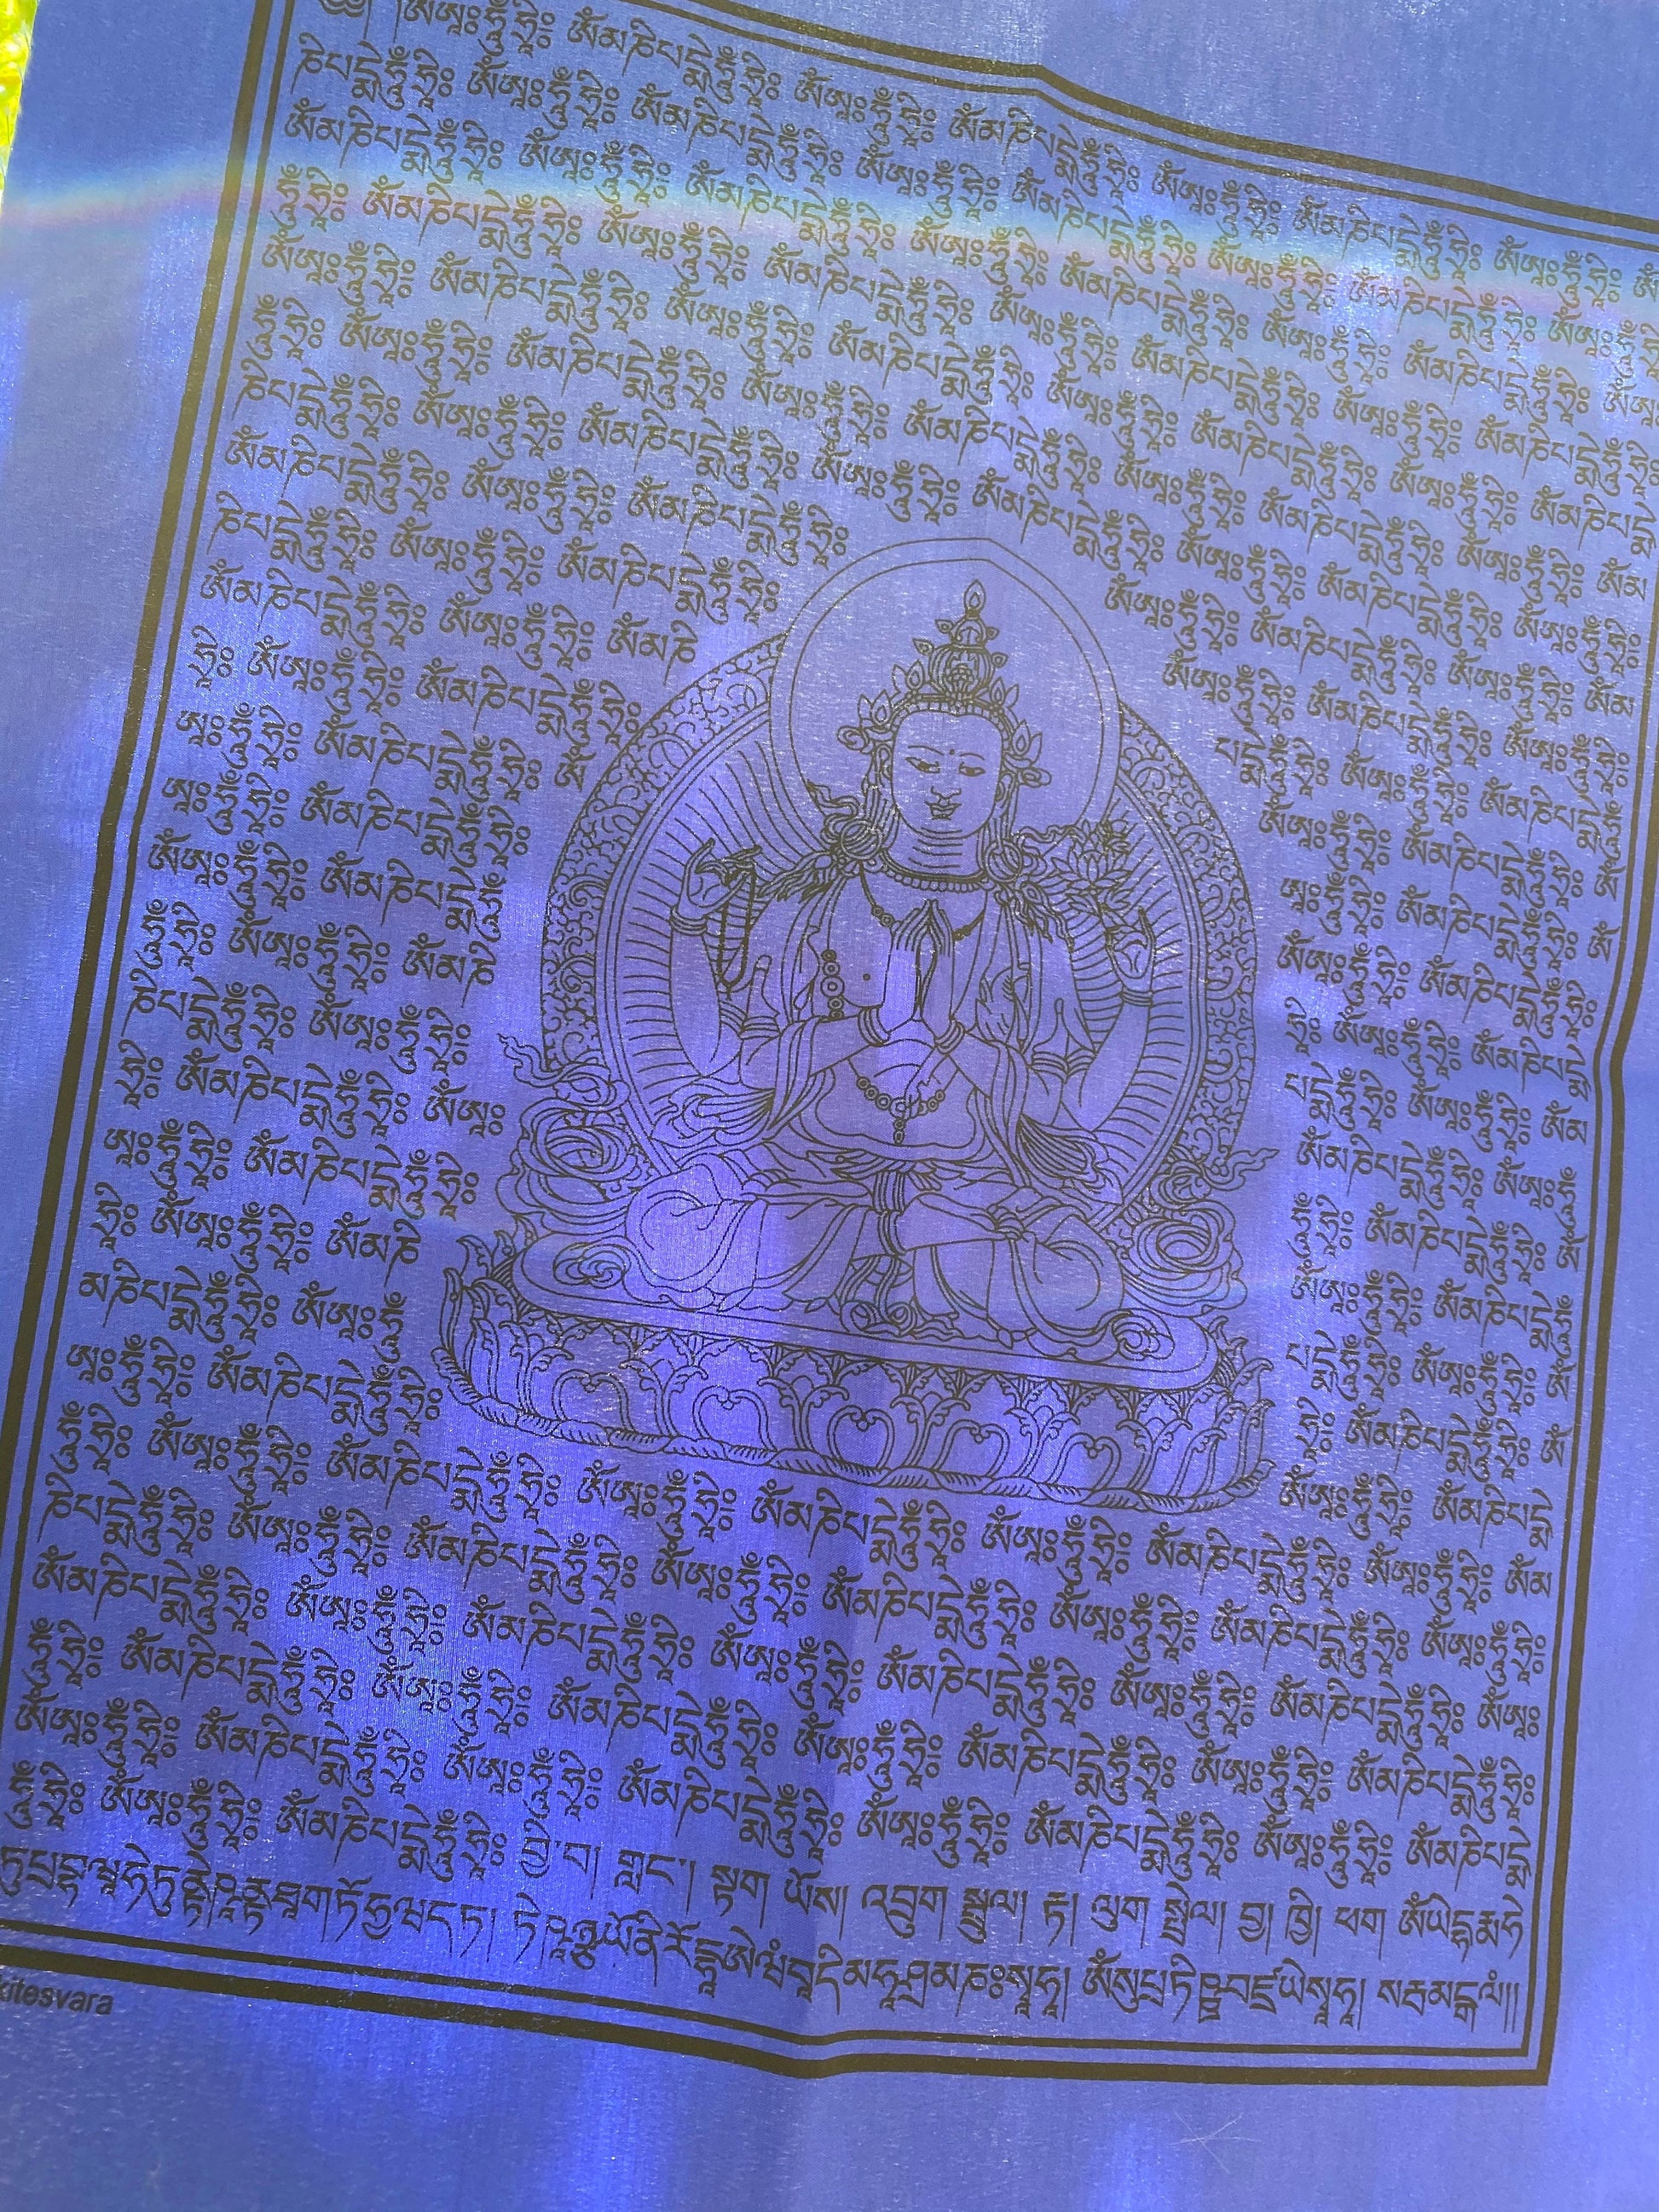 A close up of a single blue 14 by 17 inch Chenrezig, Buddha of Compassion, prayer flag hanging outside in dappled light.